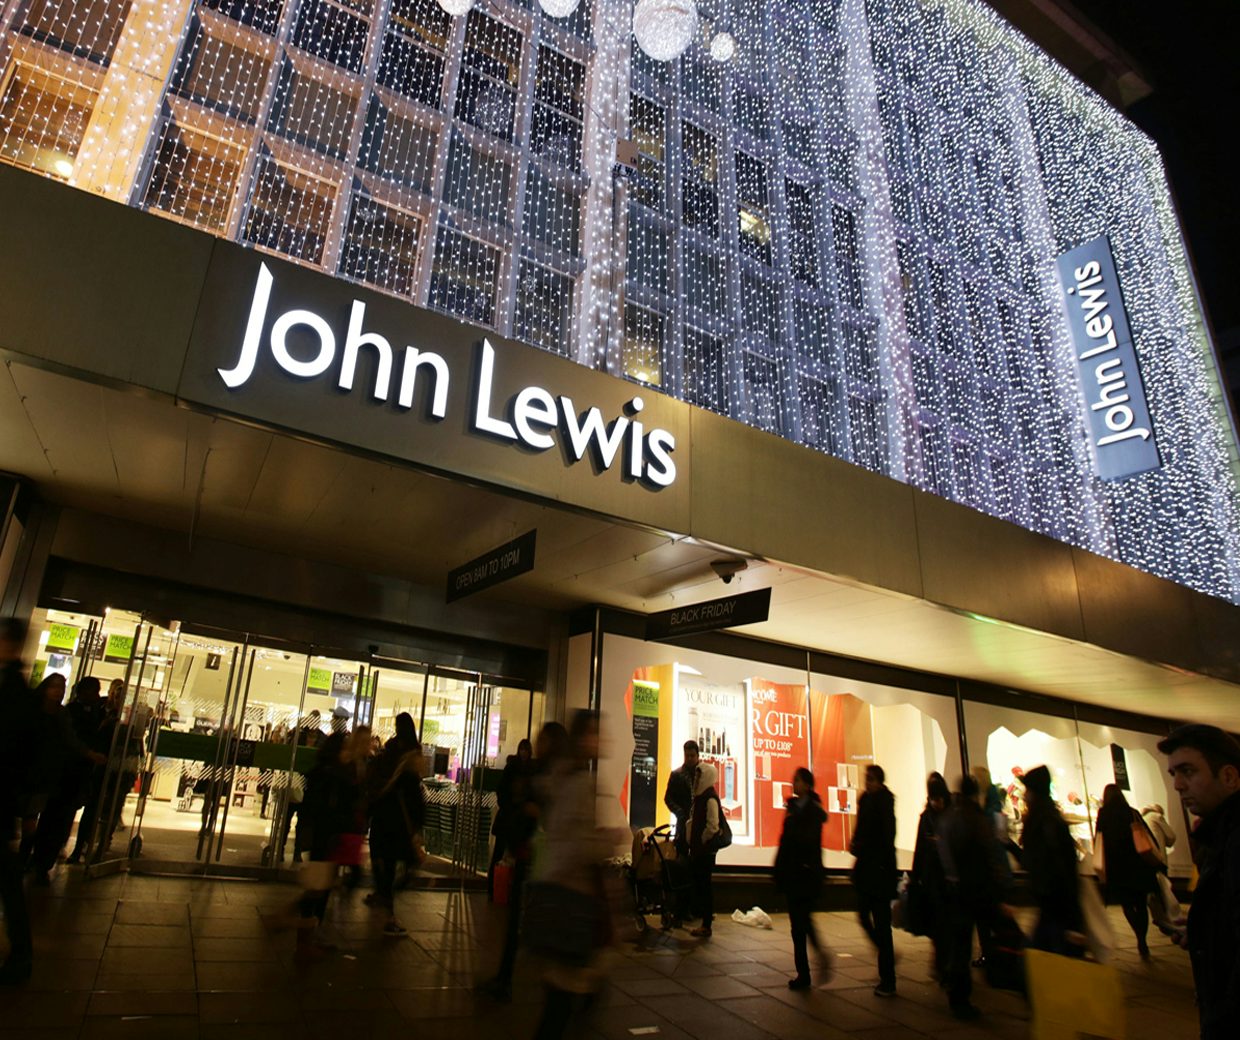 John Lewis says it won’t be drawn into a price war this Christmas